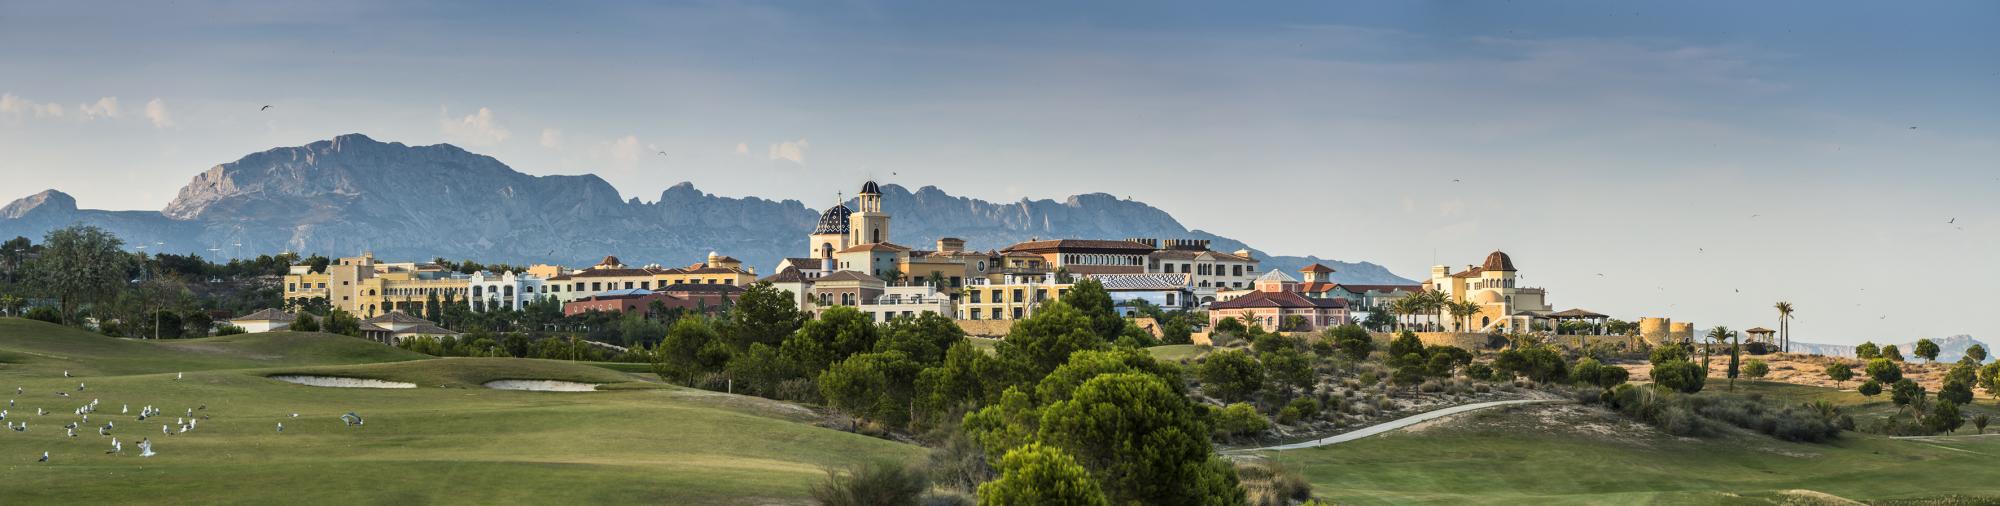 Melia Villaitana Hotel provides two of the finest golf courses within Costa Blanca